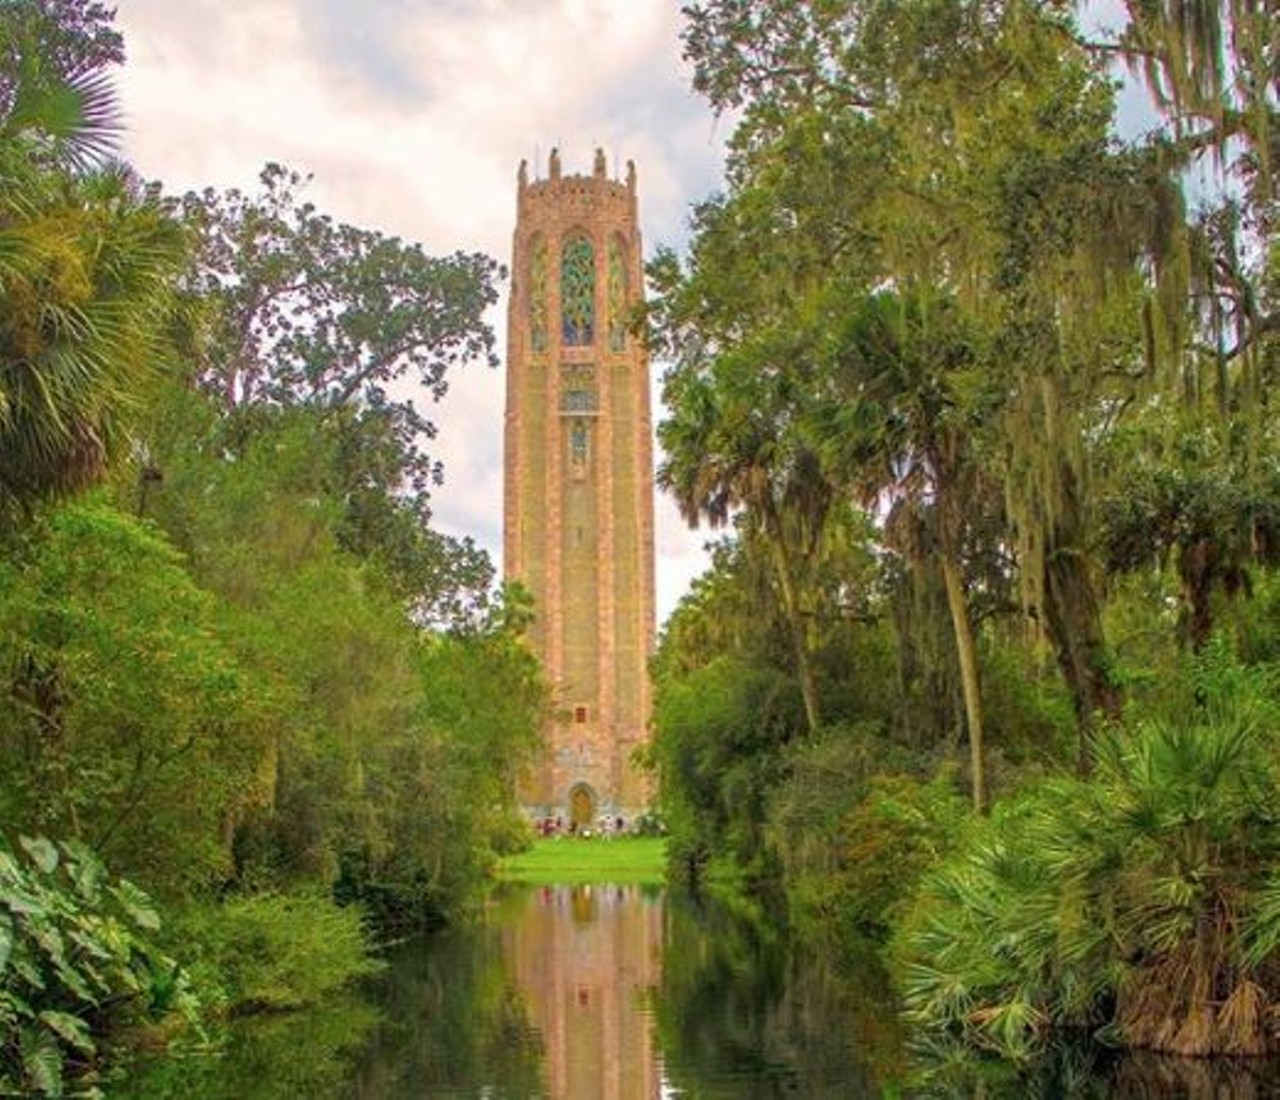 Lake Wales
Estimated drive time: 1 hour, 45 minutes
Sitting in the center of the Florida Penninnsula, where the Orange groves still actually grow, is the Lake Wales community. And tucked away in Lake Wales is Bok Tower Gardens, a tower standing since 1929 with a 60-bell carillon whose chiming can be heard every day at 1 p.m. and 3 p.m. Inside there are eight levels full of history on how the tower came to be and a room where bells can be viewed, as well as access to the top. The tower is surrounded by beautiful gardens which house endangered plants, pollinating plants and gorgeous landscapes. There are also two trails which are going to leave you wanting to come back.
Photo via diaryofarmin/Instagram